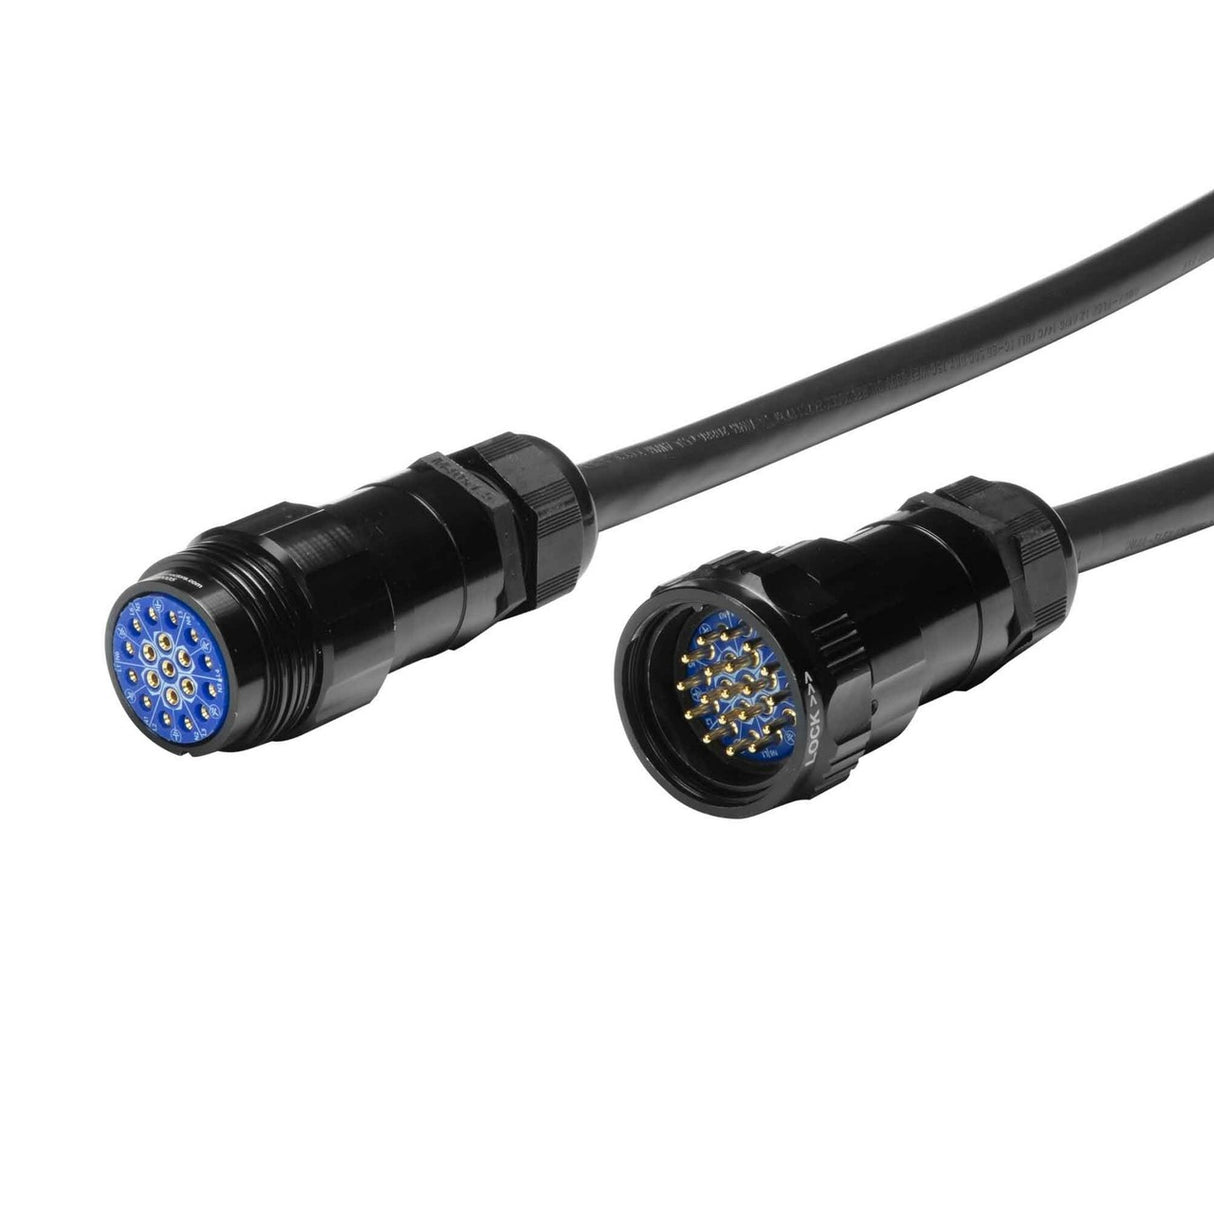 Elite Core 19 Pin Soco Extension Male to Female Lighting Power Cable with Standard Connector, 25 Foot